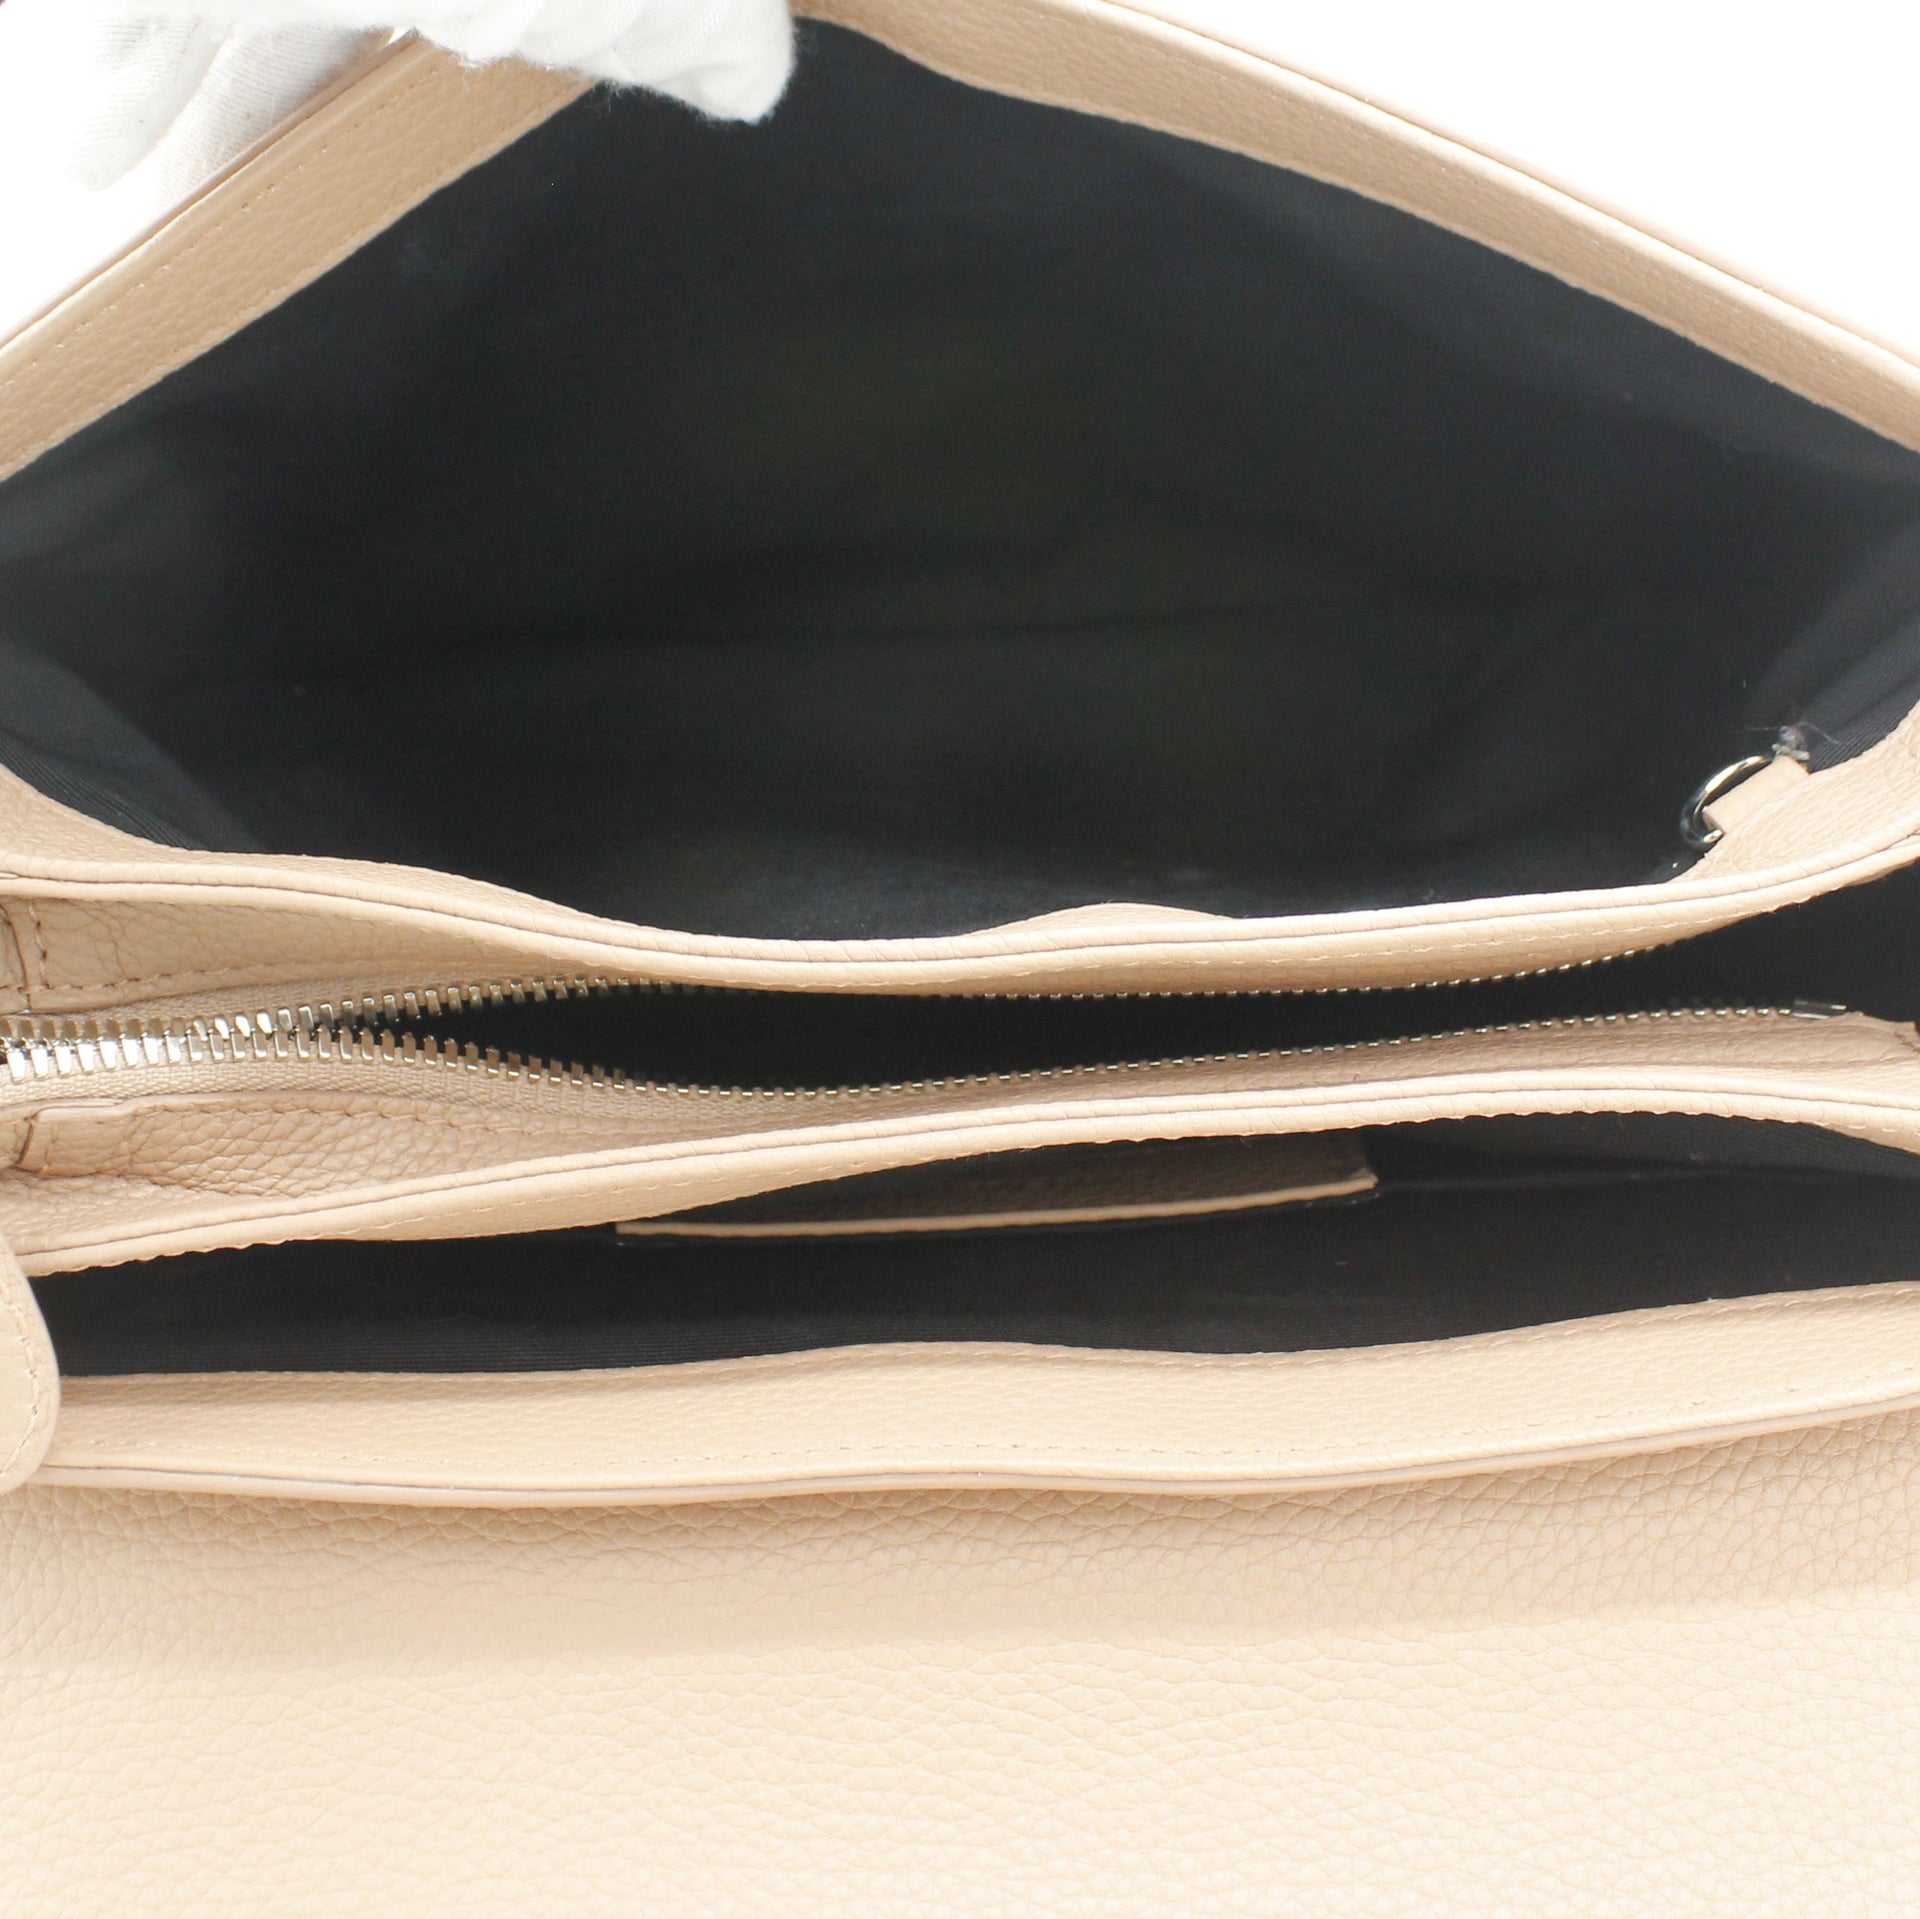 Le Dix Soft Courrier Bag Leather Small